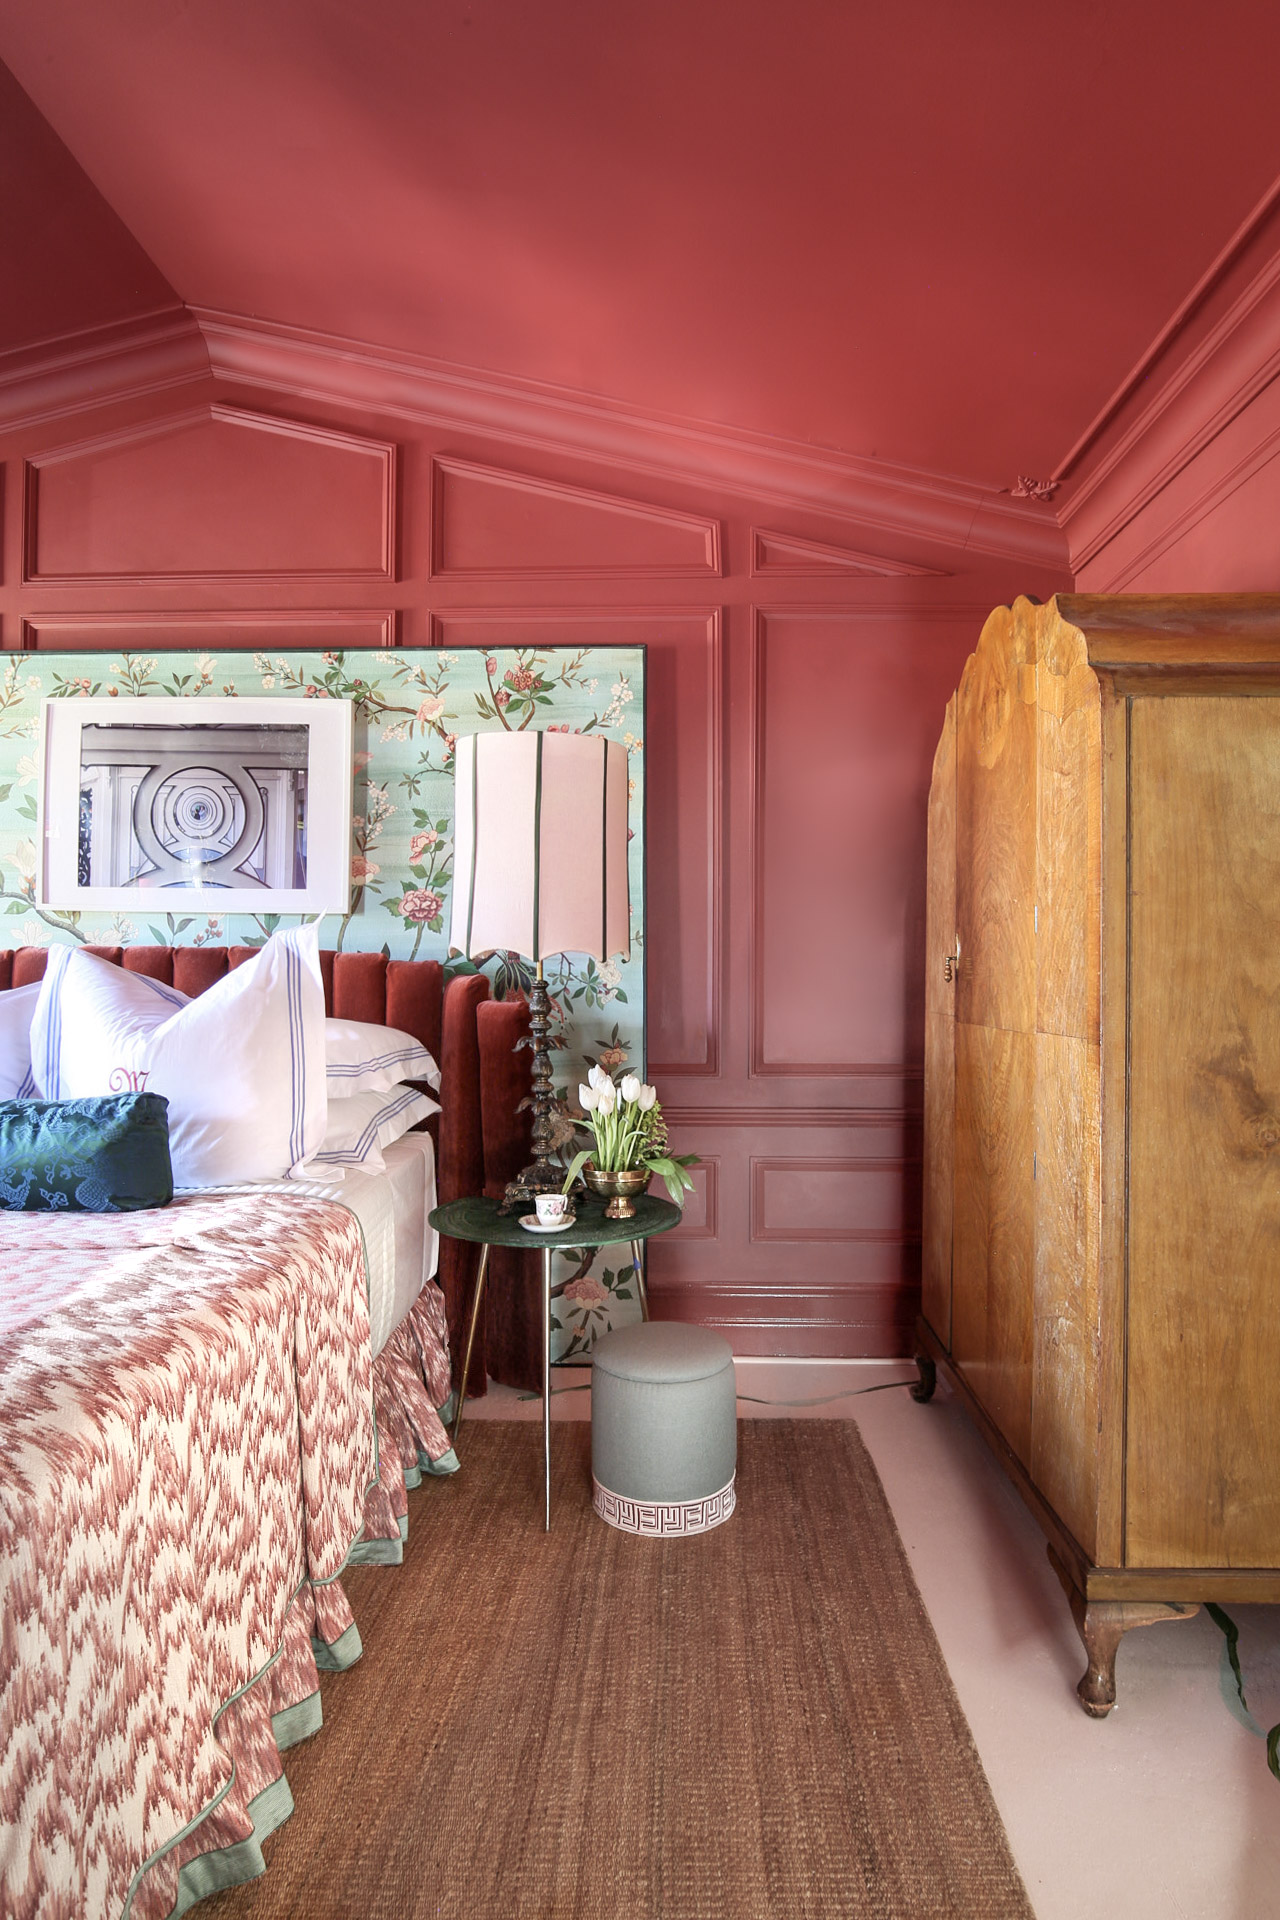 Jewel Marlowe bedroom makeover, red bedroom, red room, art deco, hollywood regency, ruffle bedskirt, molding, channel tufted bed, monogram sheets, sisle rug, fabricut, stroheim, schumacher, flame stitch